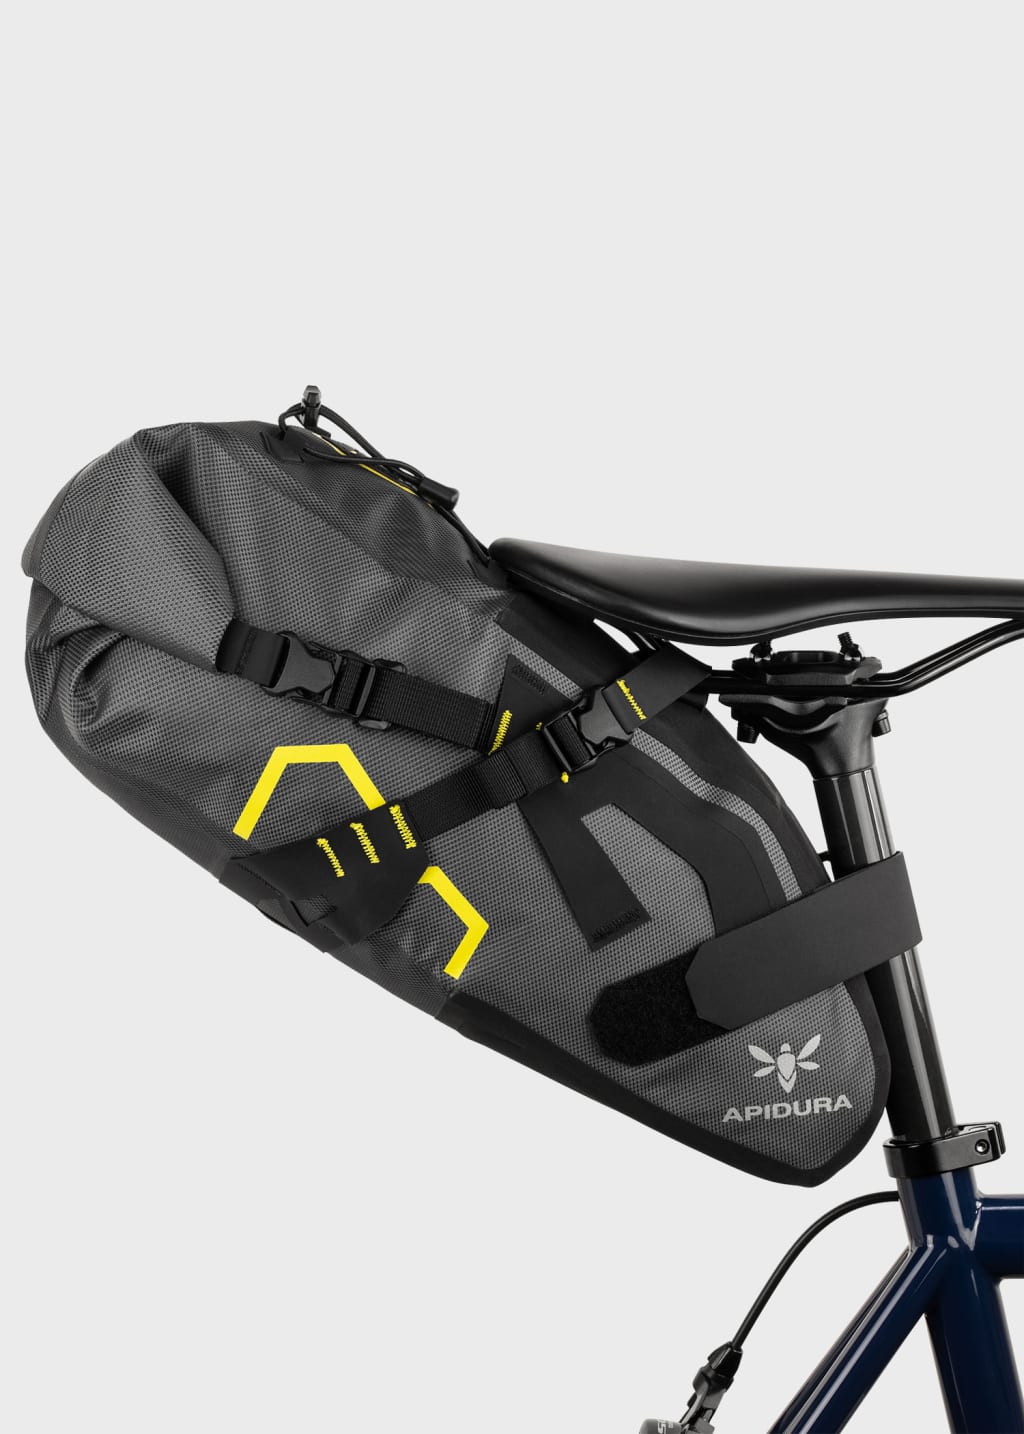 Detail View - 'Expedition' Saddle Pack Cycling Bag by Apidura Paul Smith